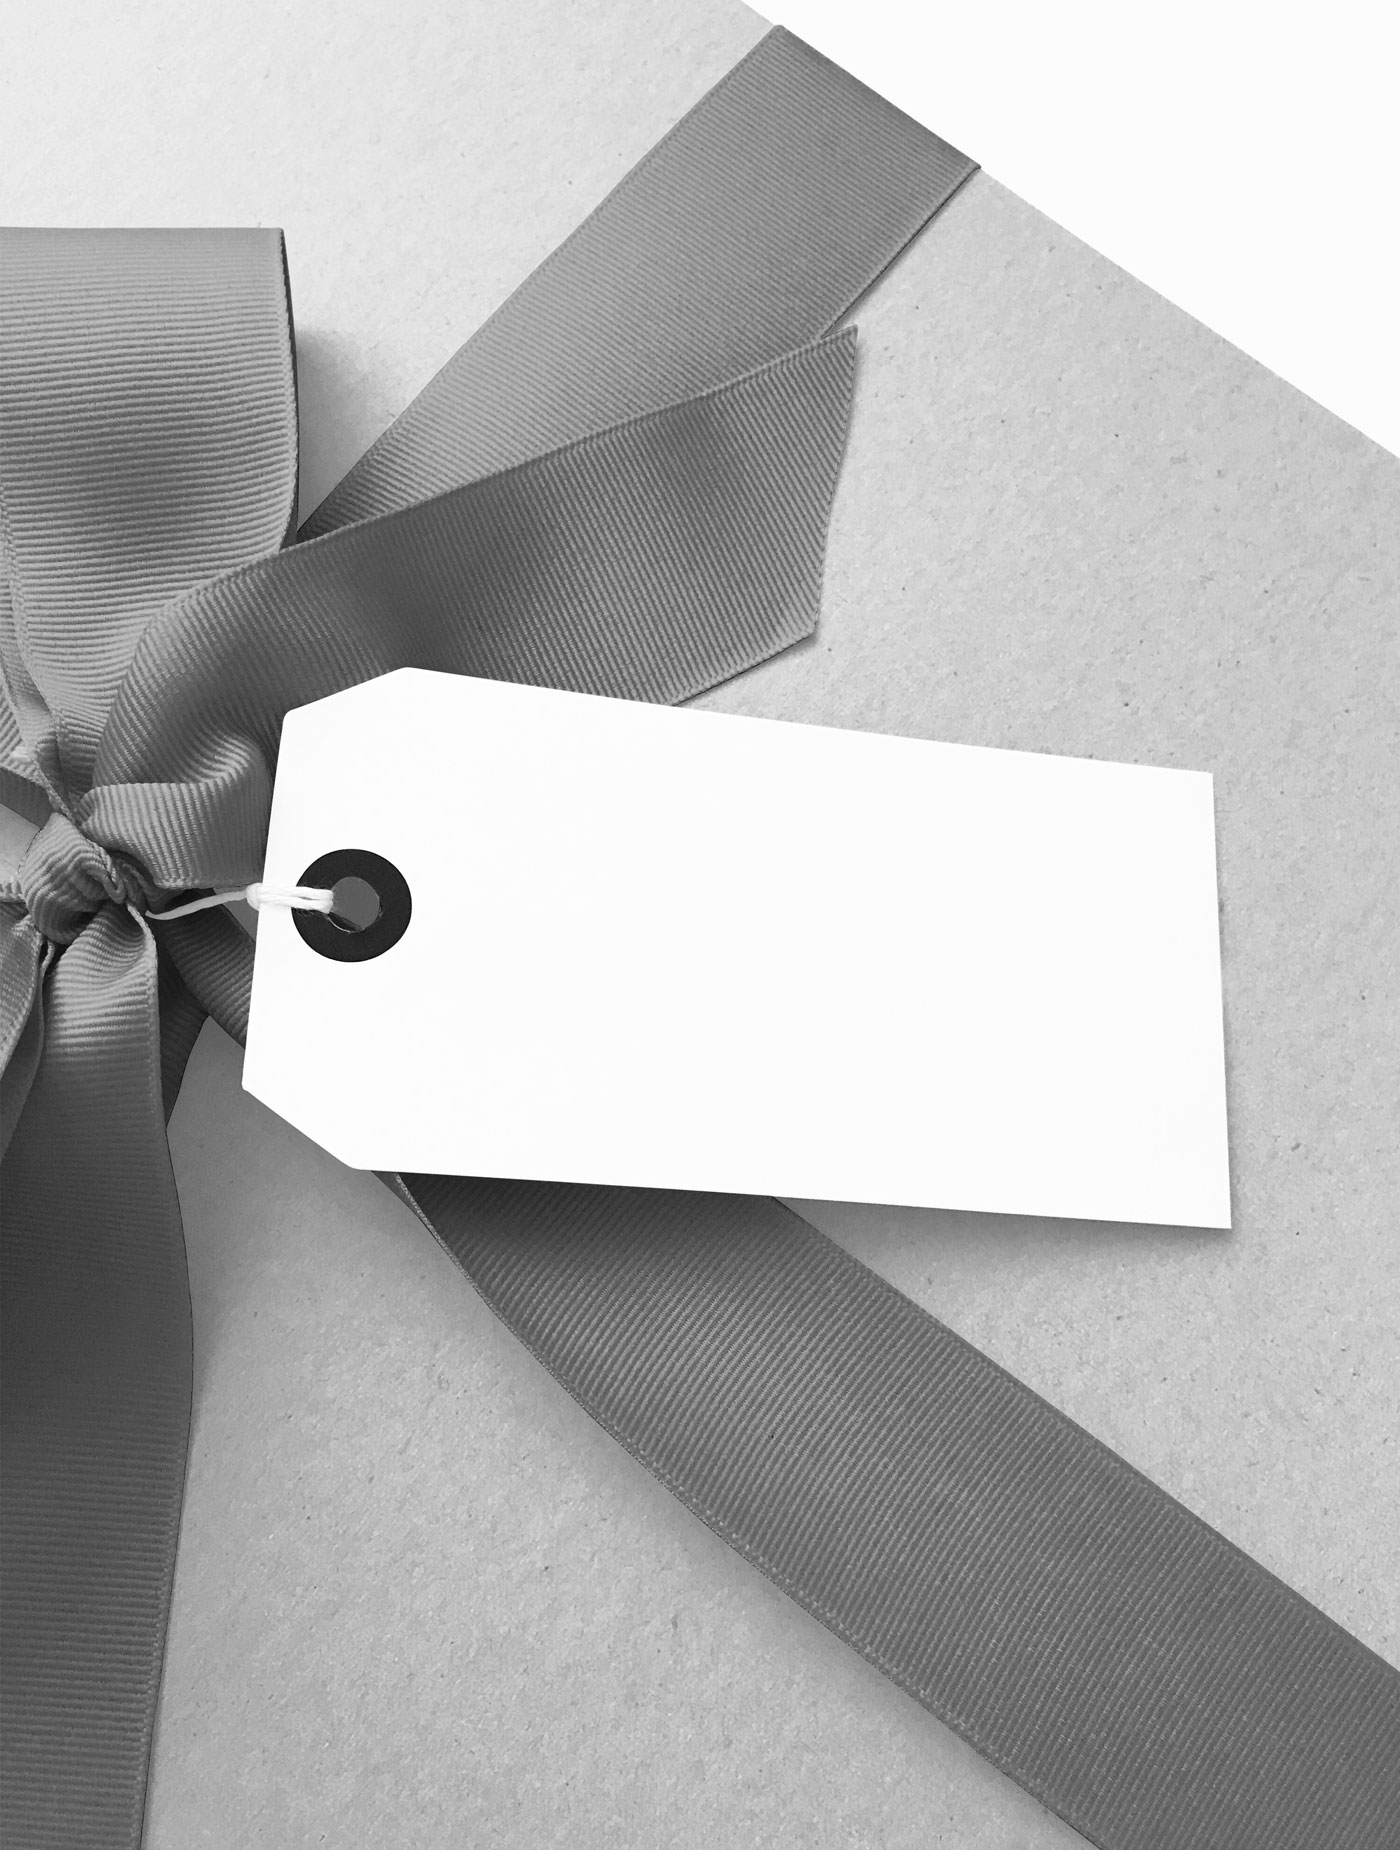 Gift Tag Mockup Attached to the Present Box Ribbon FREE PSD